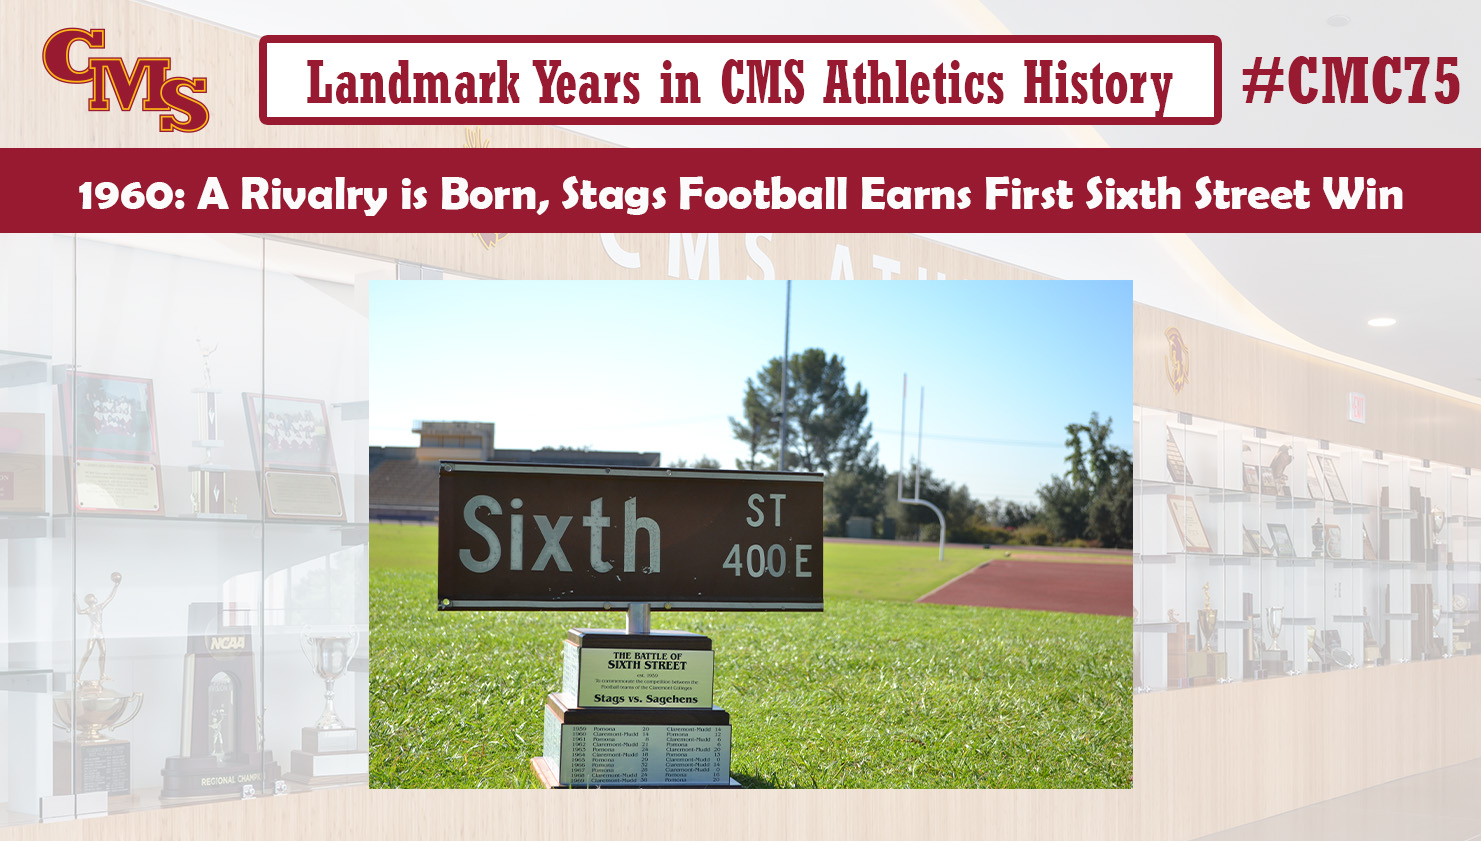 The current Sixth Street trophy. Words over the photo read: Landmark Years in CMS Athletics History: 1960: A Rivalry Is Born, Stags Football Earns First Sixth Street Win